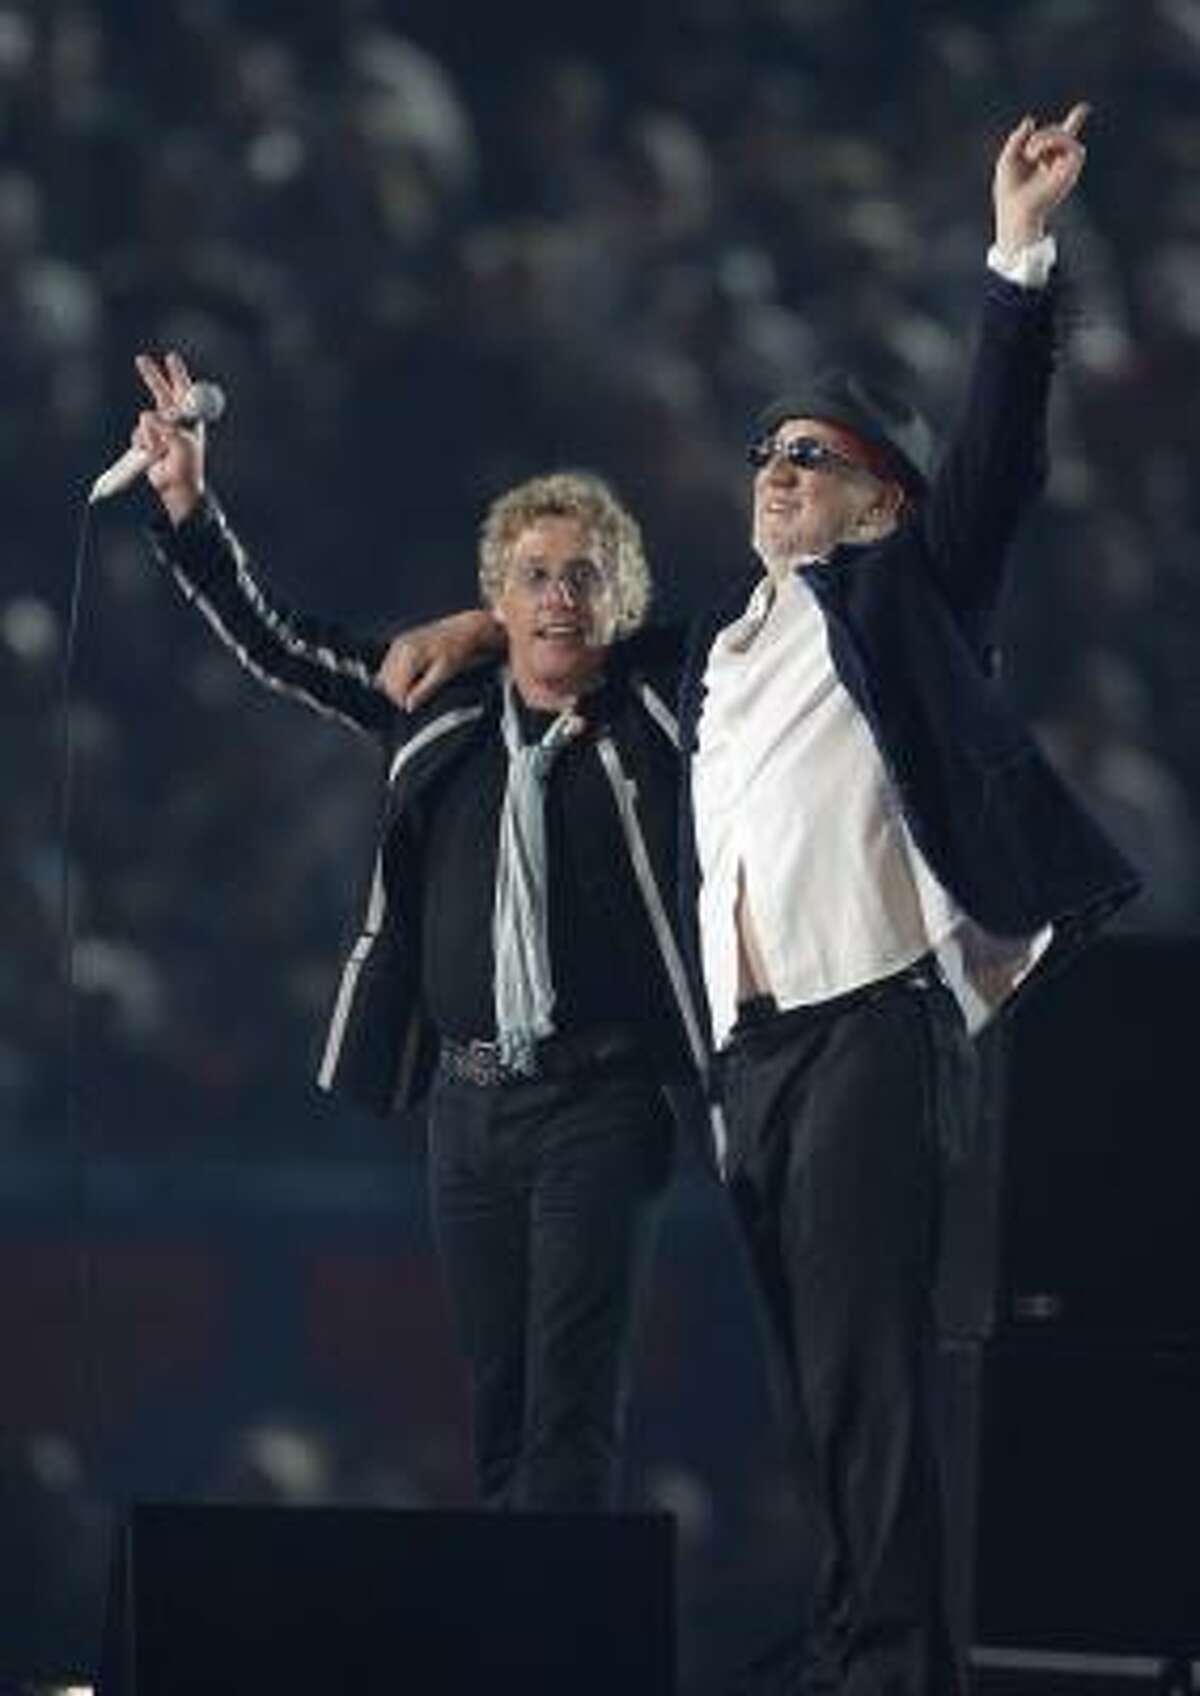 Roger Daltry, left, and Pete Townshend of The Who salute the crowd after performing during halftime of the NFL Super Bowl XLIV football game in Miami, Sunday, Feb. 7, 2010.